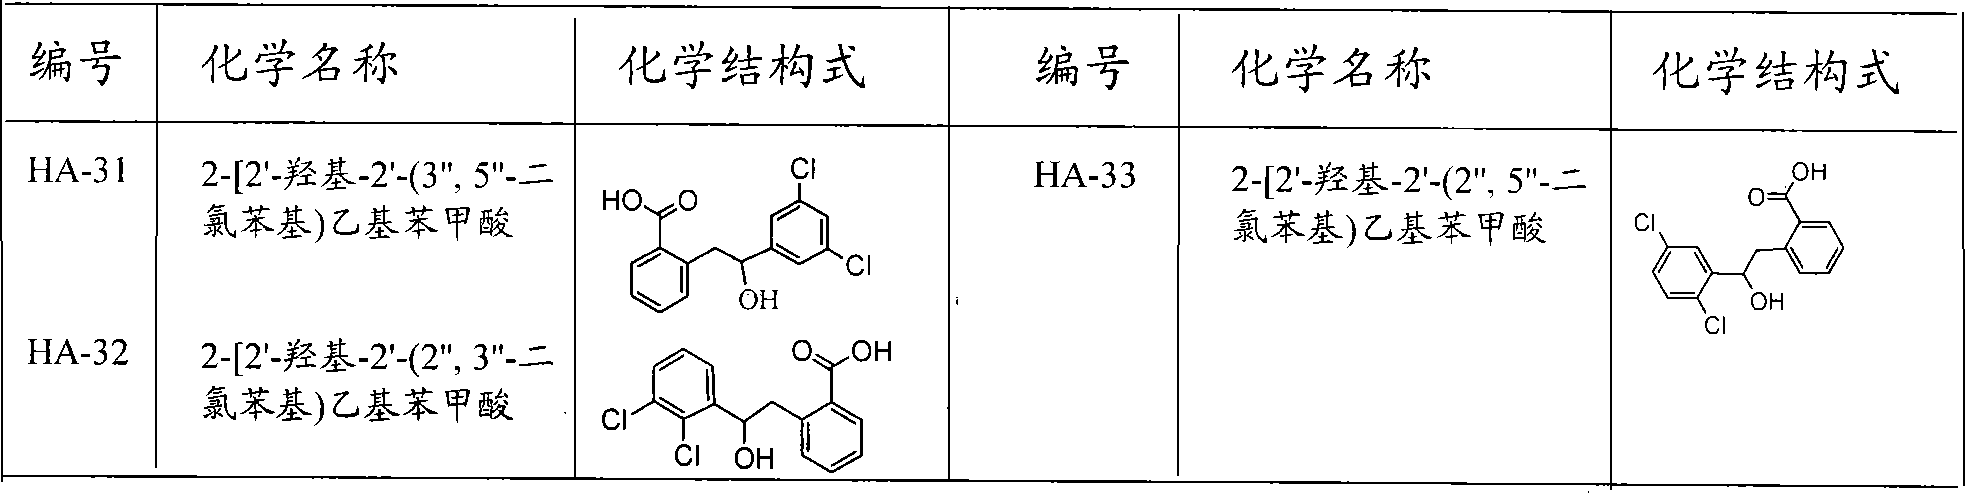 Preparation and usage of unnatural 3,4-dihydro isocoumarin derivatives